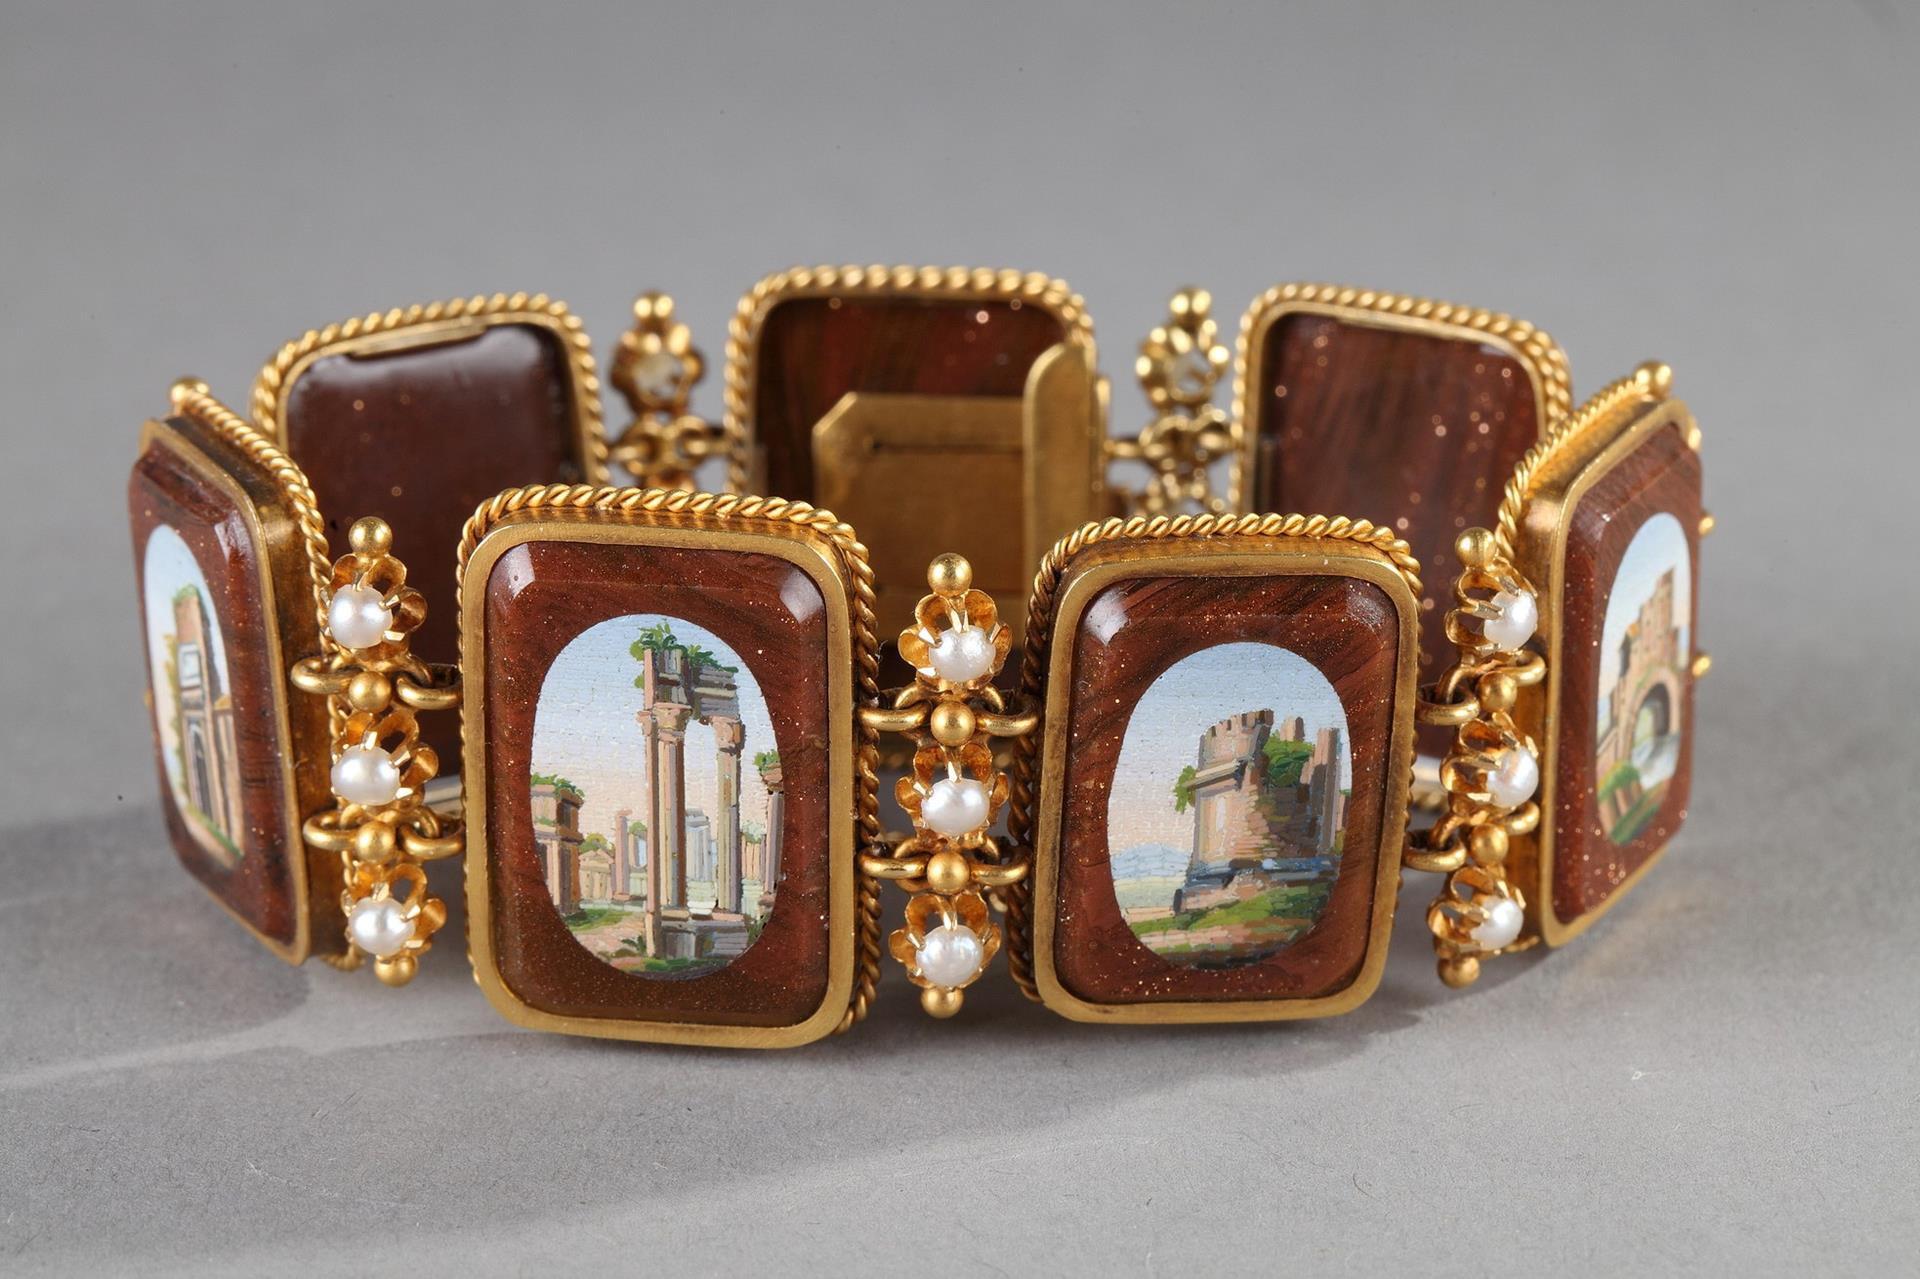 Early 19th century Micromosaic Bracelet with Scenes of Rome.